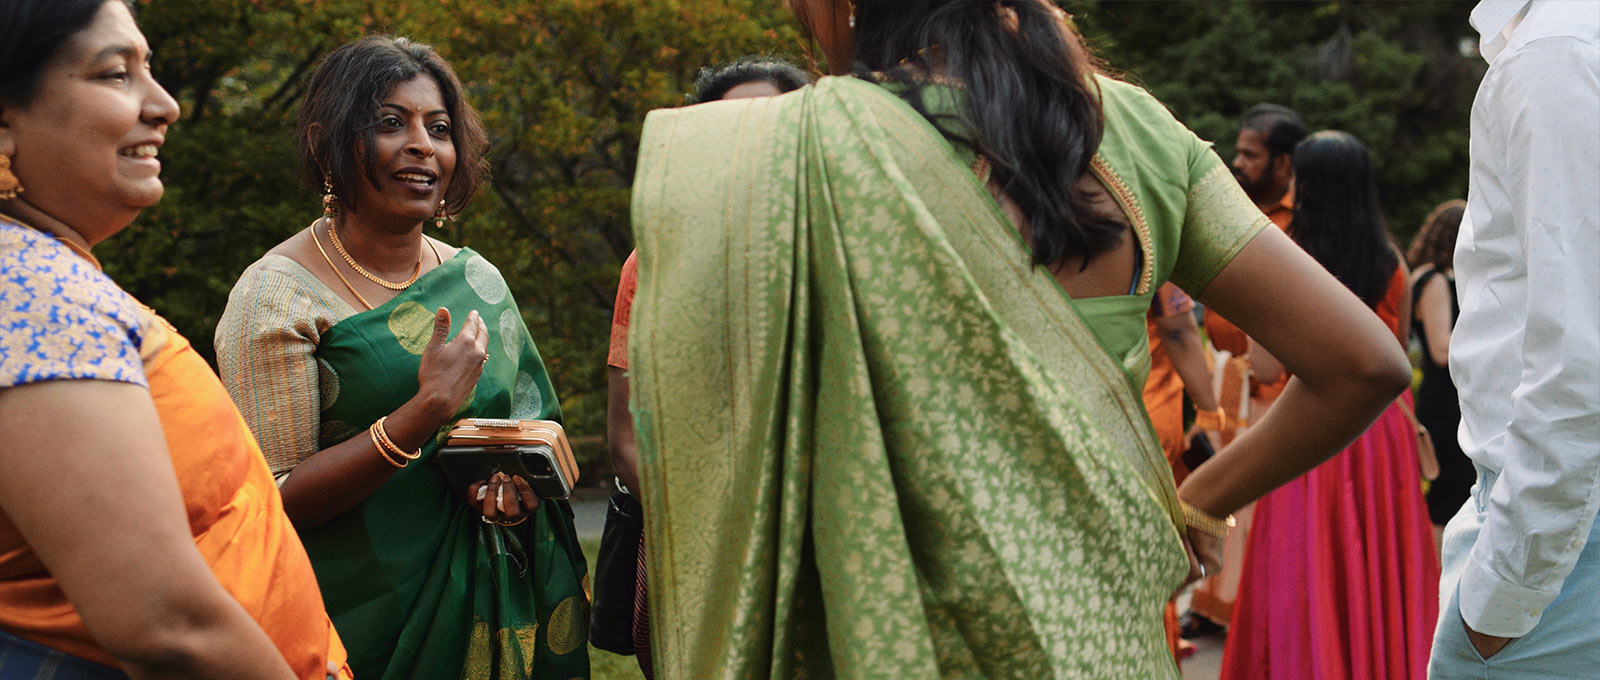 Woman in saree smiles during outdoor cocktail hour at Graydon Hall Manor.